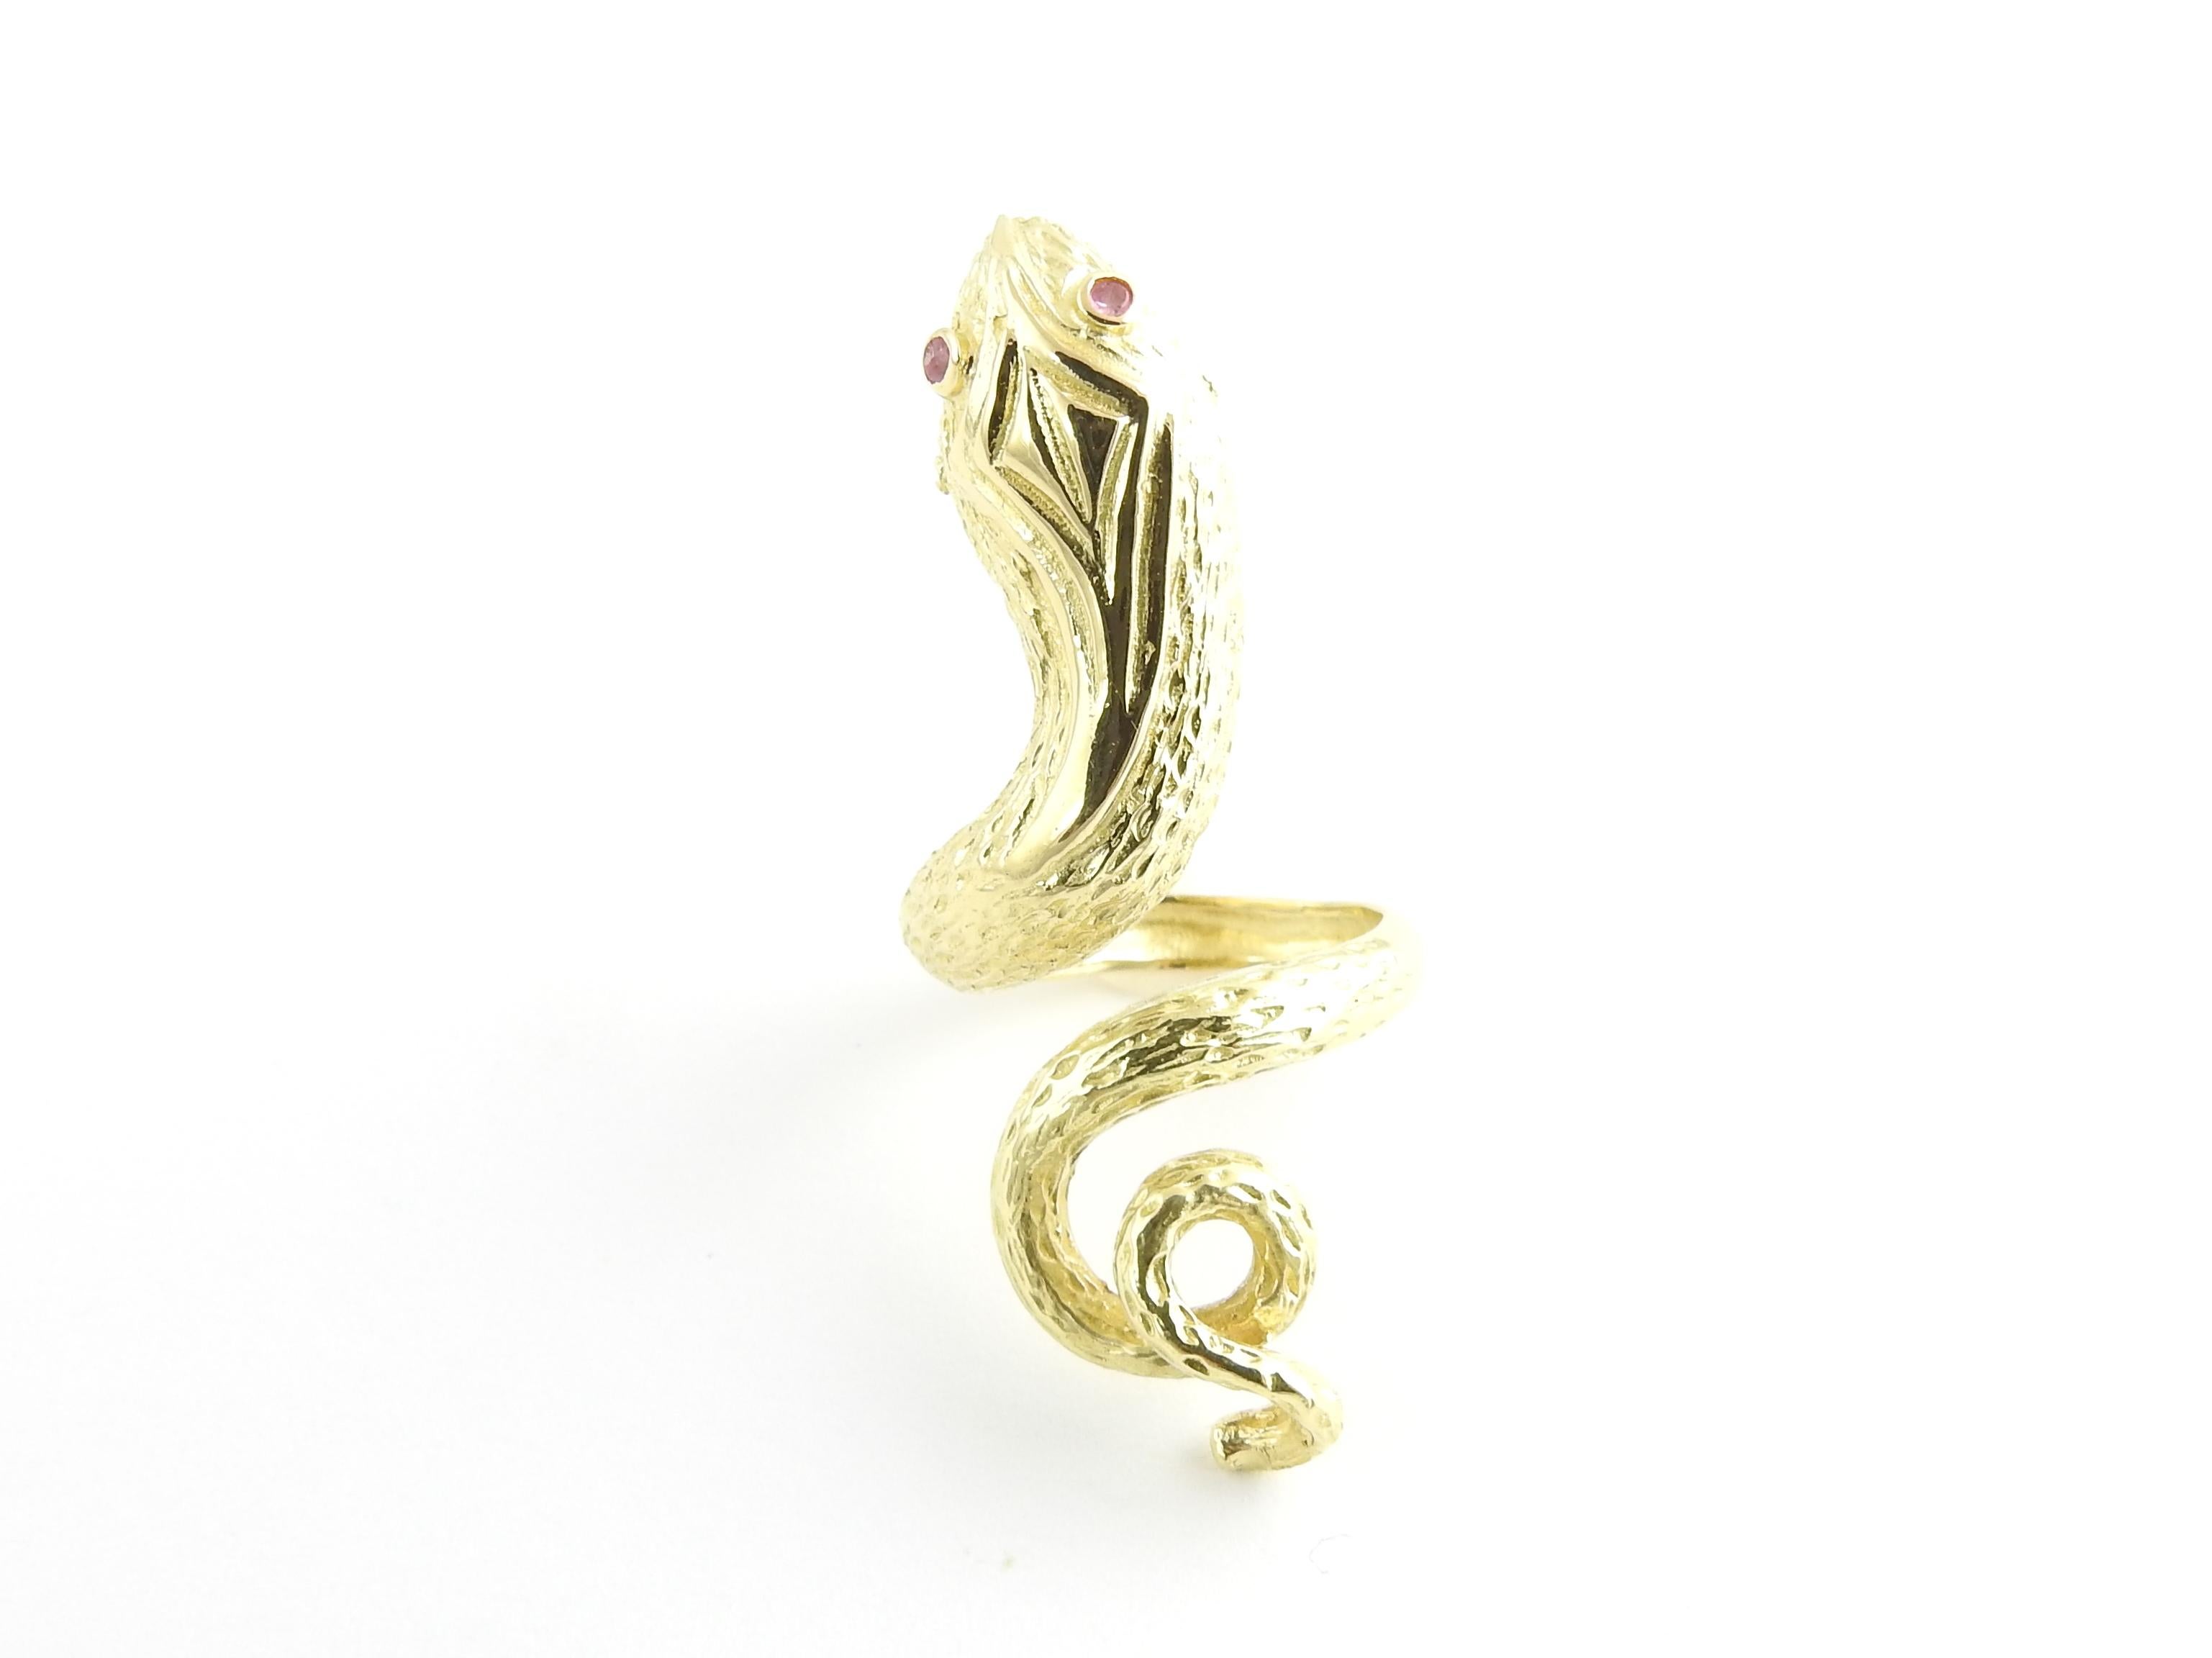 Vintage 18 Karat Yellow Gold Snake Ring Size 4.75

This elegant ring is crafted in beautifully detailed 18K yellow gold in a dramatic snake design. Accented with two ruby eyes. Width: 45 mm.

Shank: 3 mm.

Ring Size: 4.75

Weight: 7.8 dwt. / 12.2